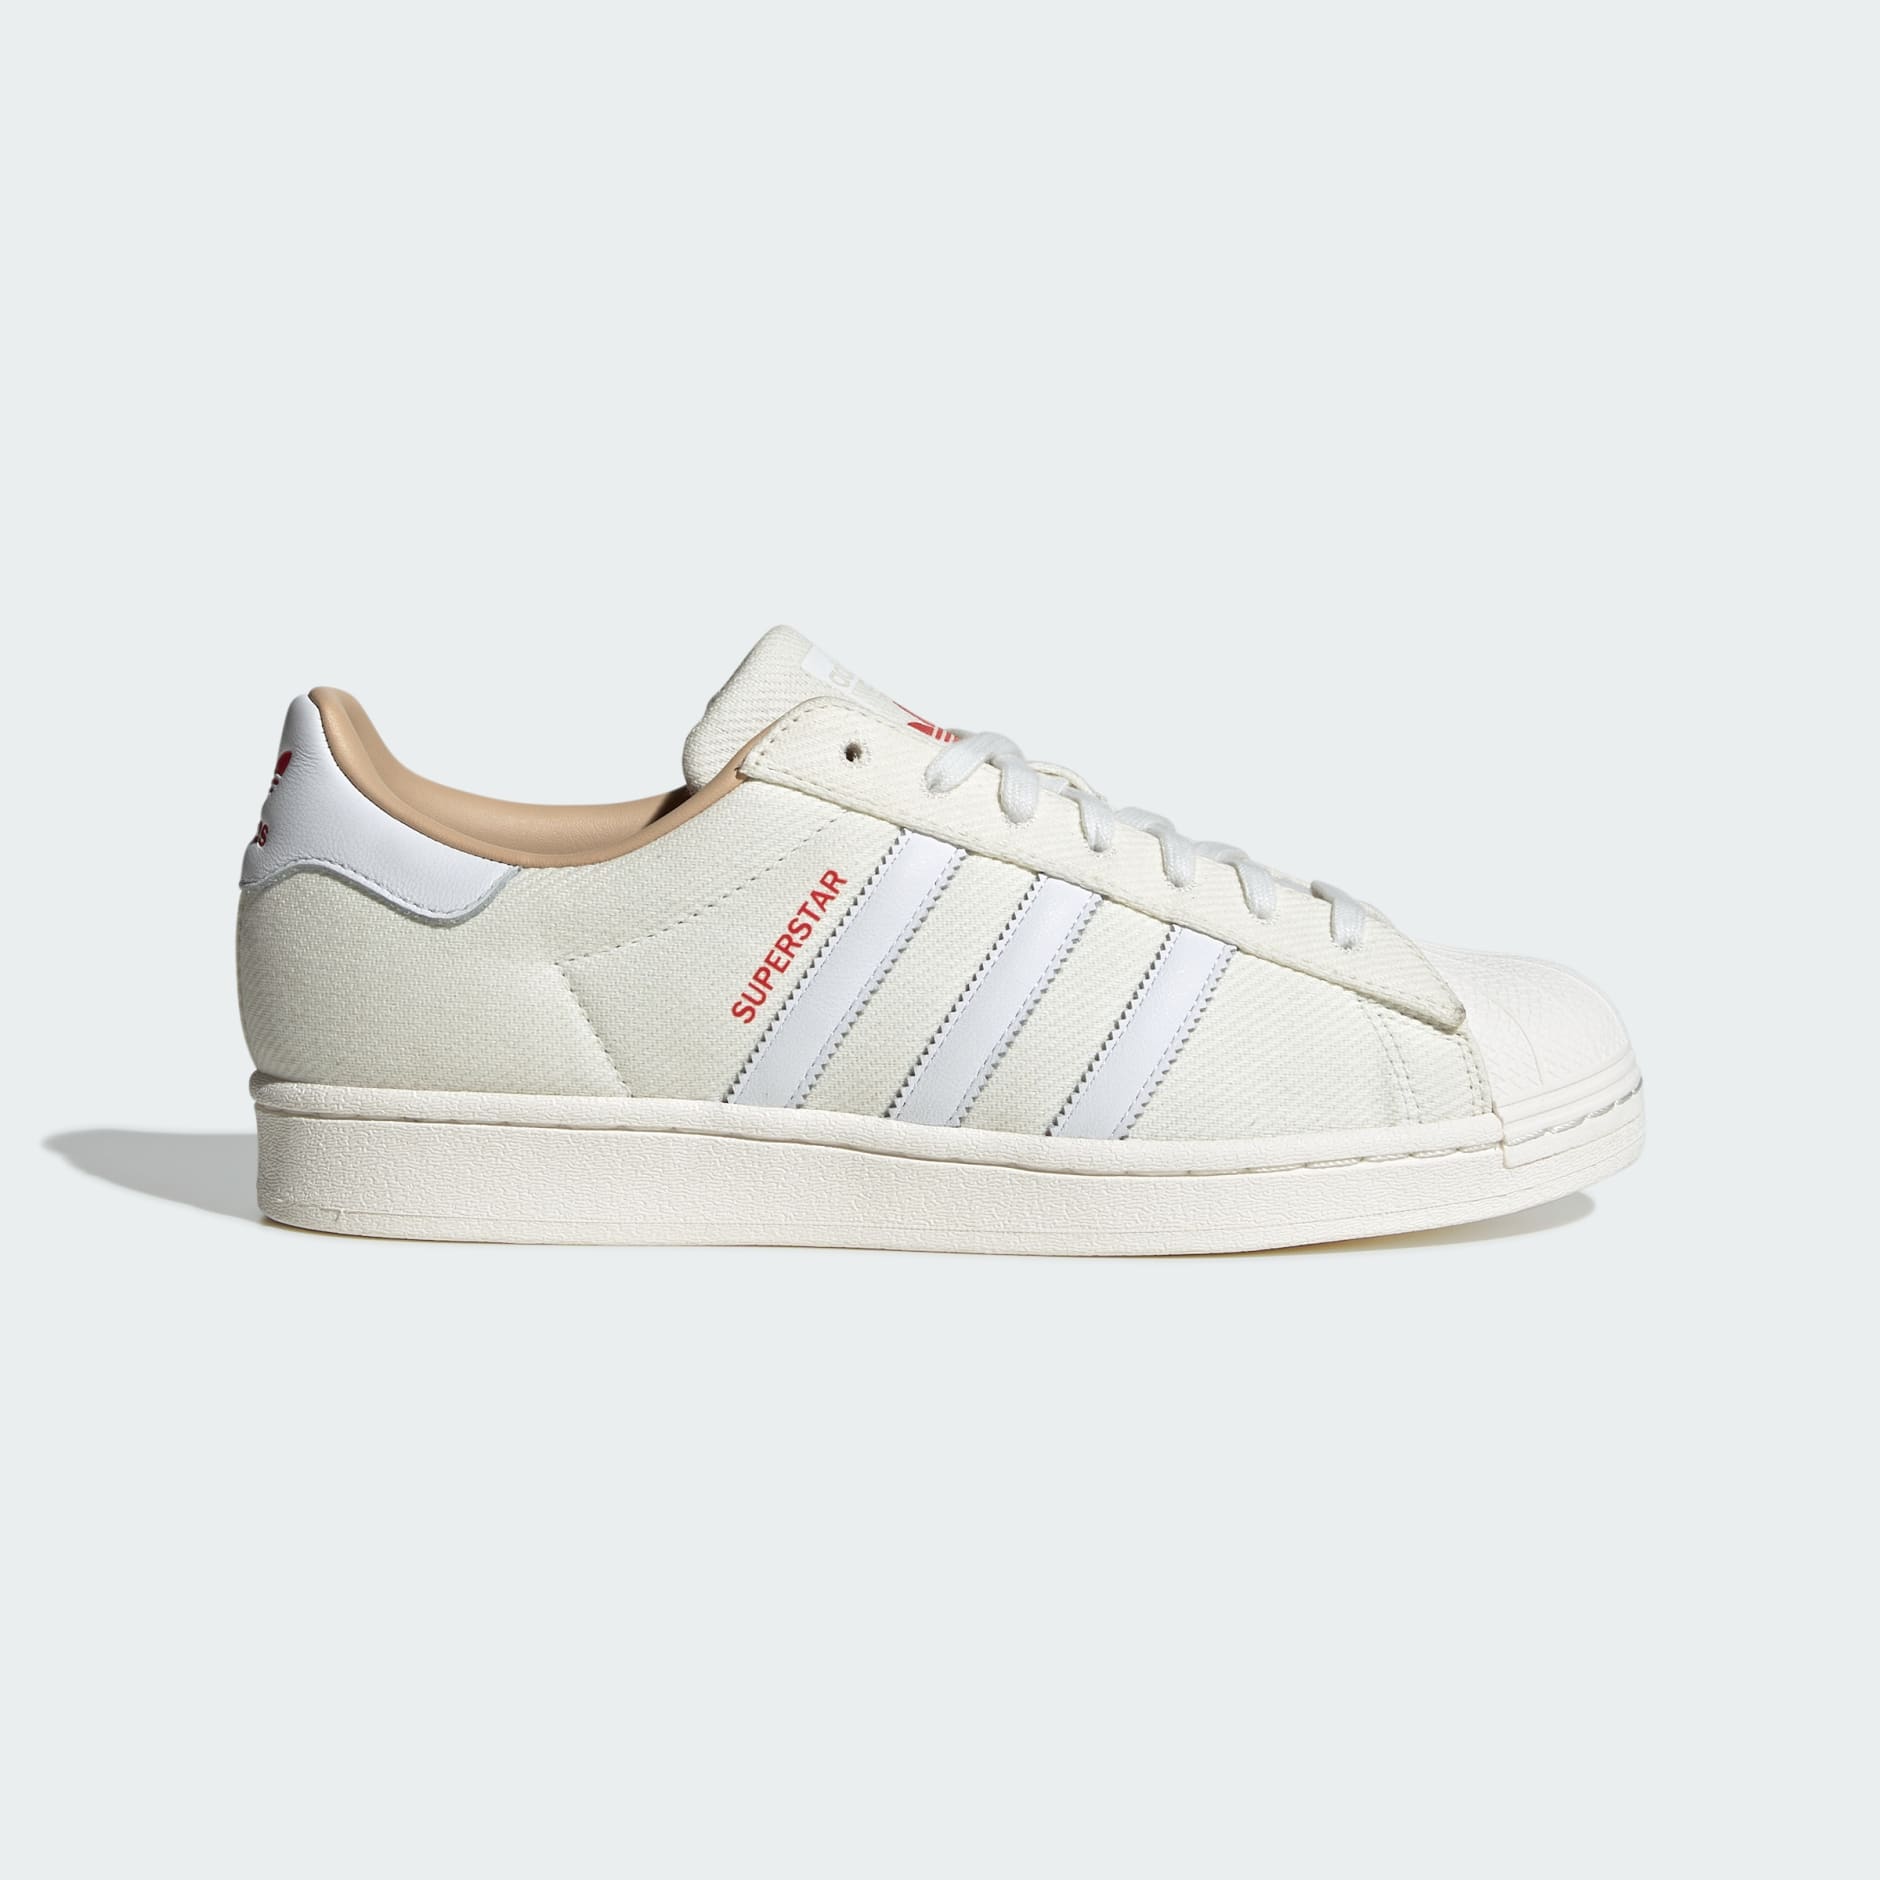 Shoes - Superstar Shoes - Multicolour | adidas South Africa